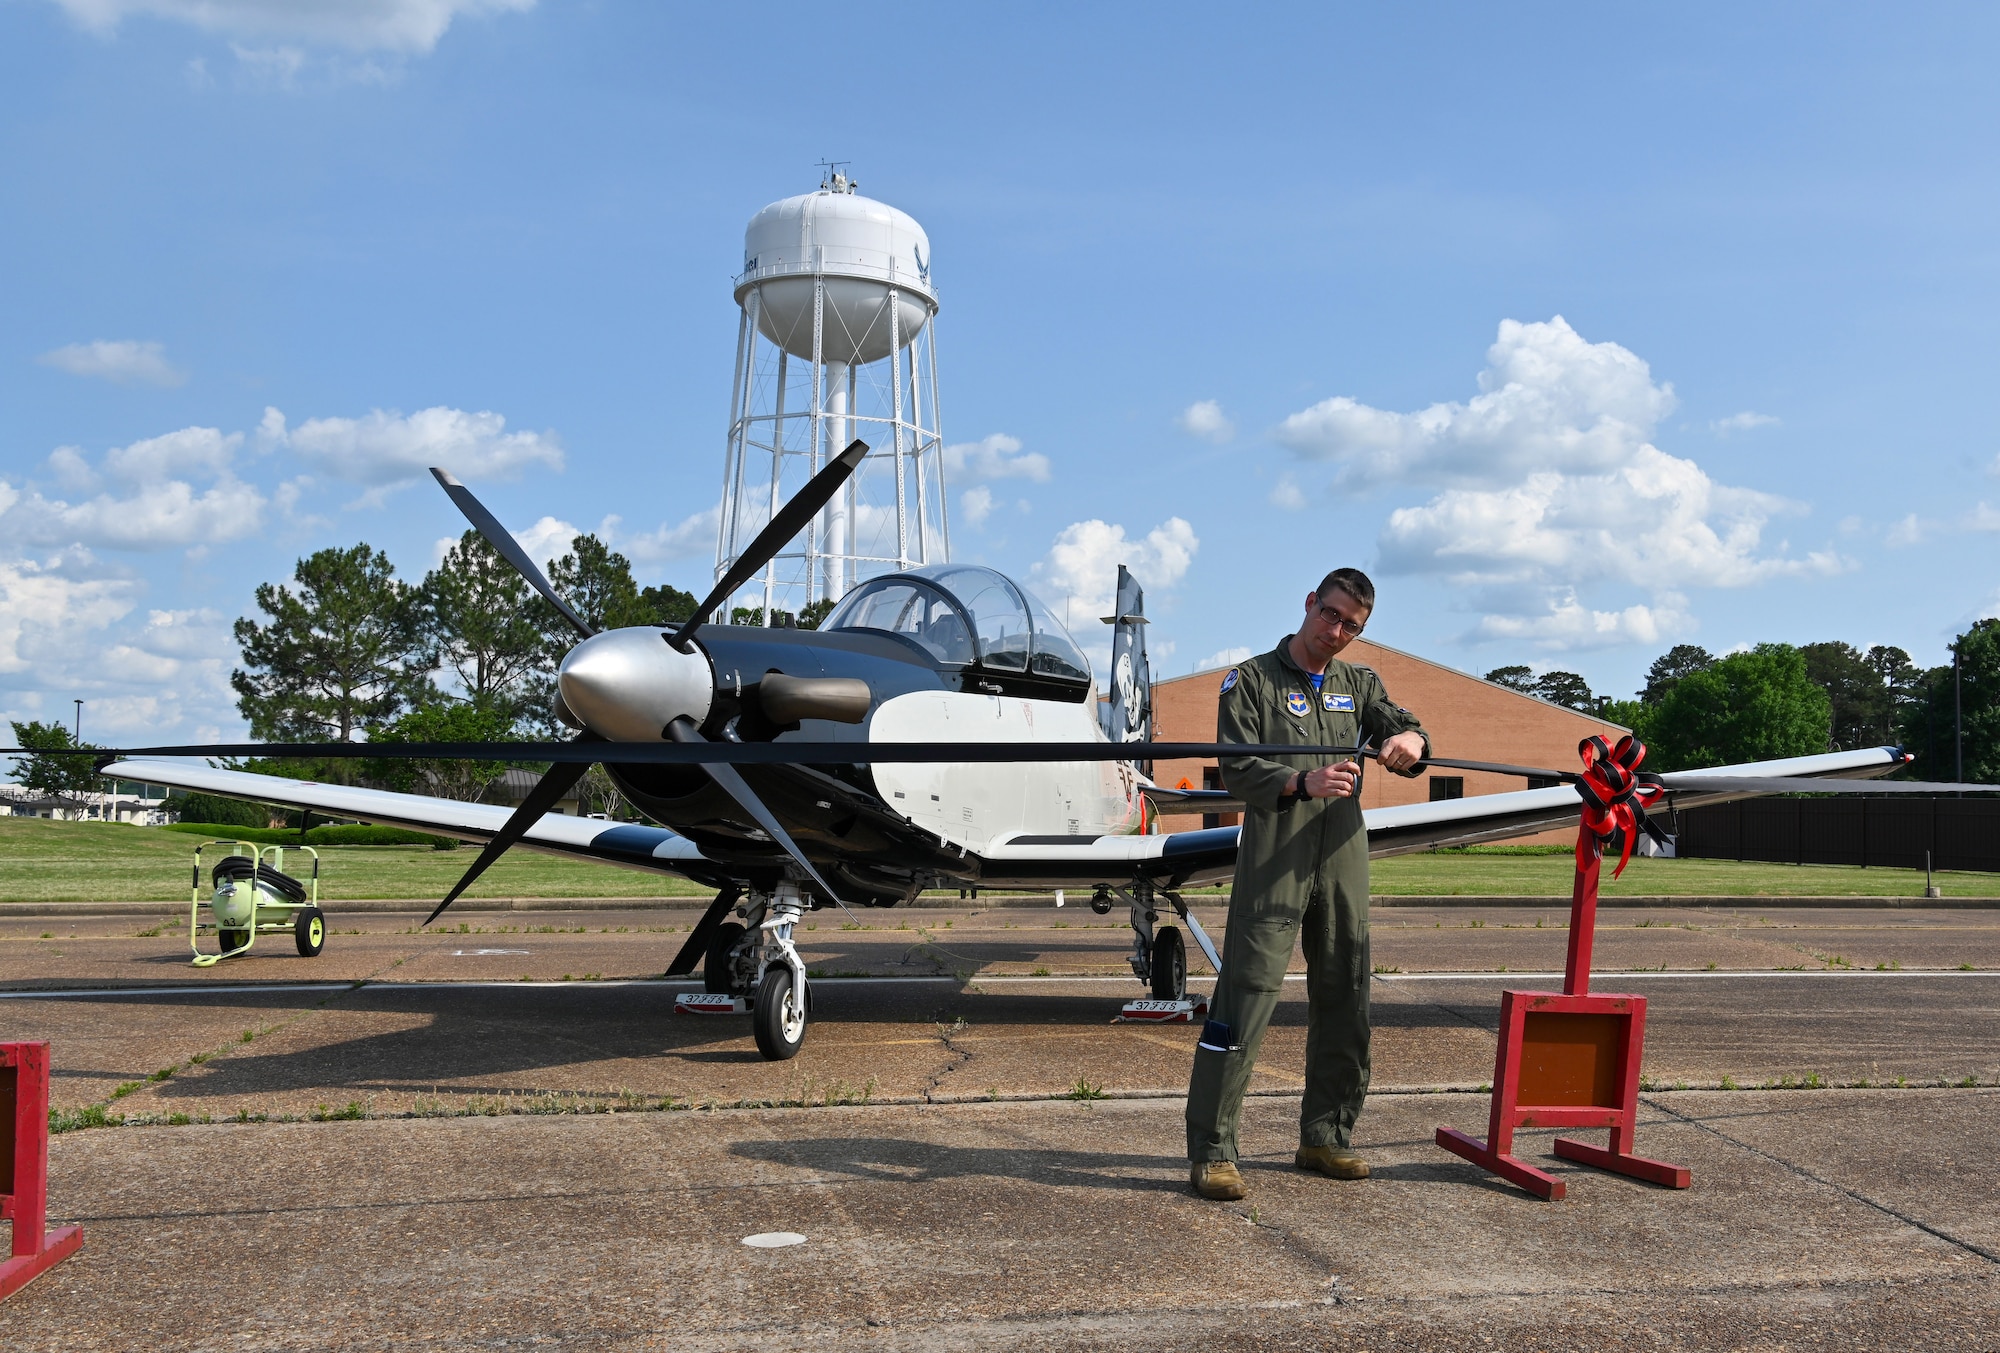 Lt. Col. Russel Kirkland, 41st Flying Training Squadron commander, cuts the ribbon of a heritage painting for the T-6A Texan II on May 13, 2022, at Columbus Air Force Base, Miss. FAIPs instruct in the T-6, T-38C Talon, or T-1A Jayhawk. (U.S. Air Force photo by Senior Airman Davis Donaldson)